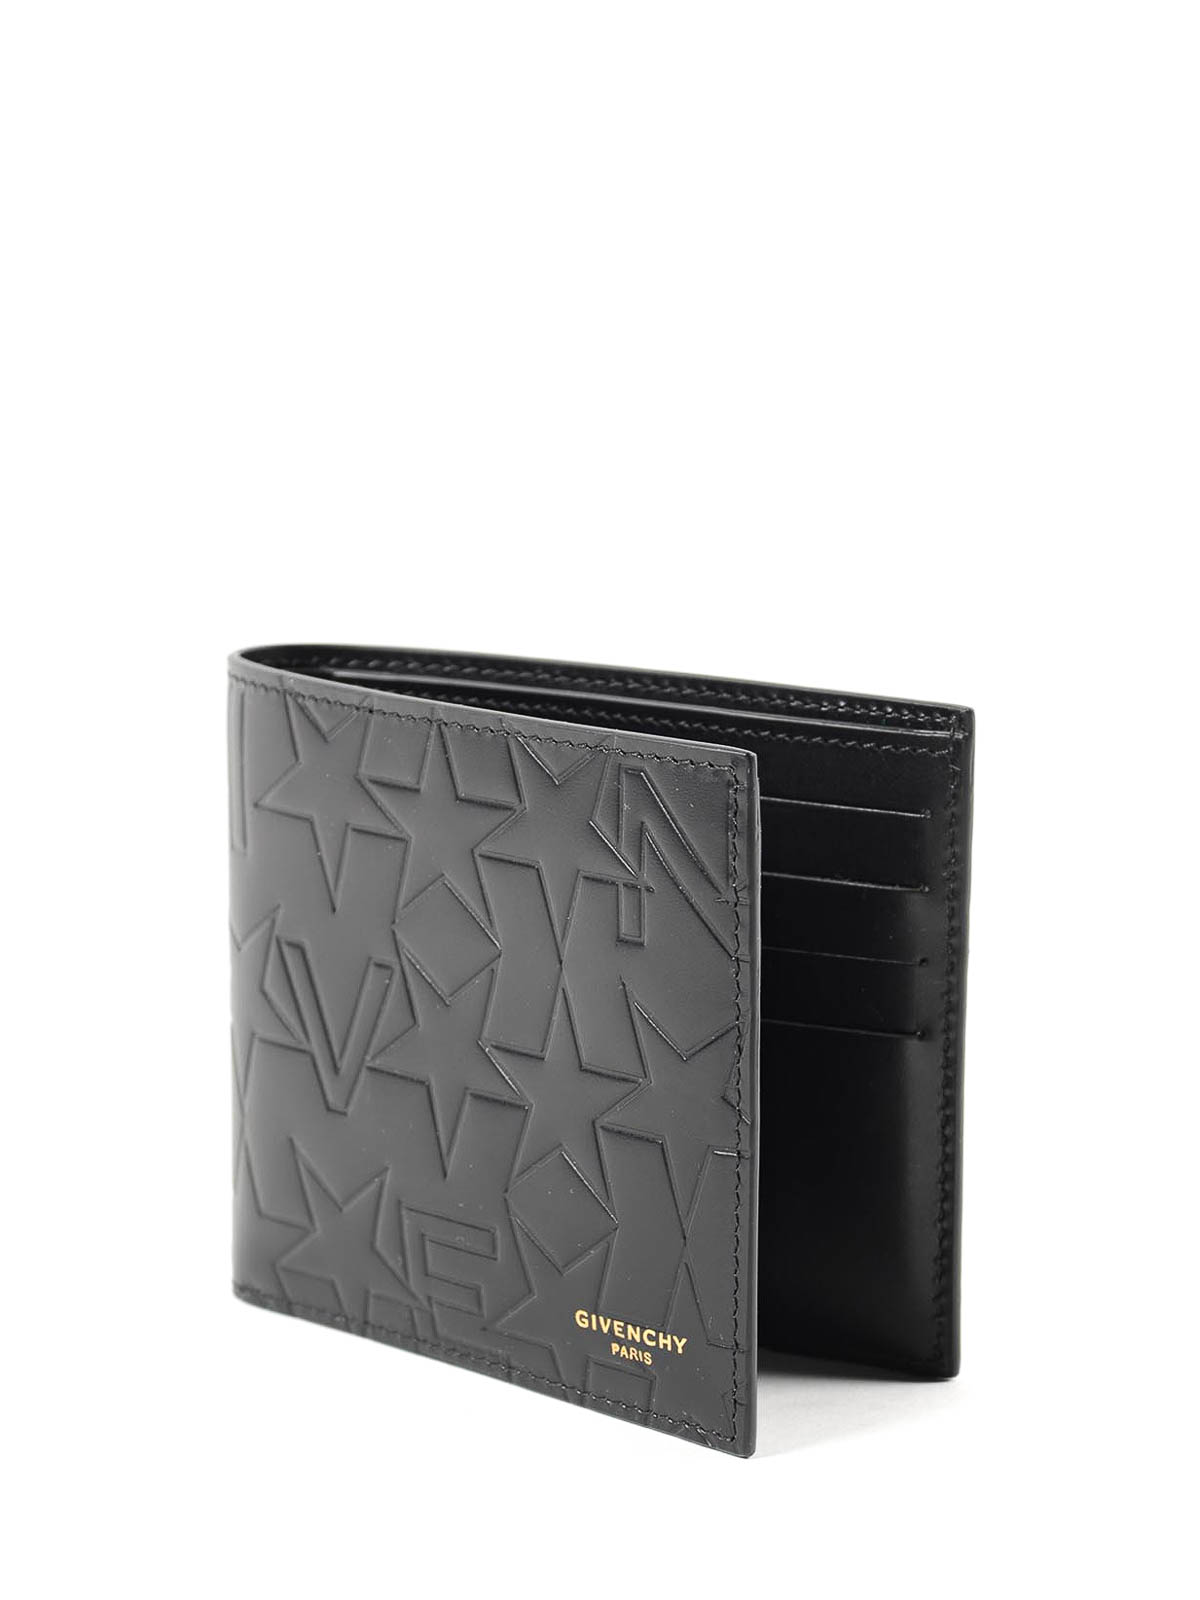 givenchy mens wallet sale